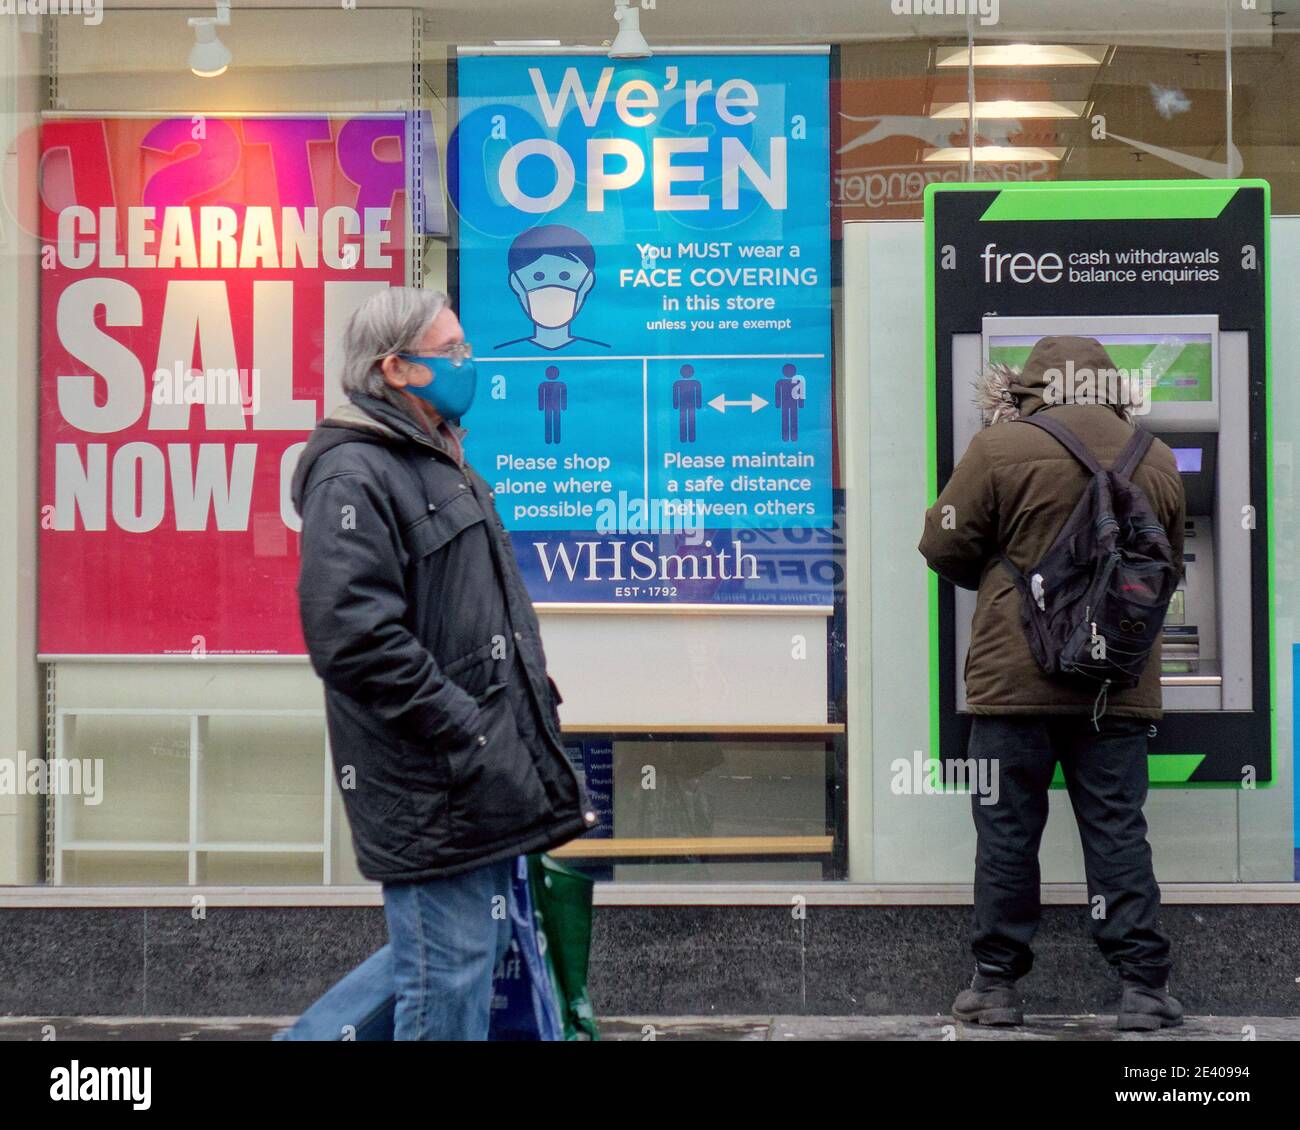 Glasgow, Scotland, UK. 21st January, 2021.Lockdown Thursday was wet and finally saw police walking the city centre with the new rules, mask signs everywher W h Smith has signs at eye level outlining the protocols for inside the store.  Credit Gerard Ferry/Alamy Live News Stock Photo